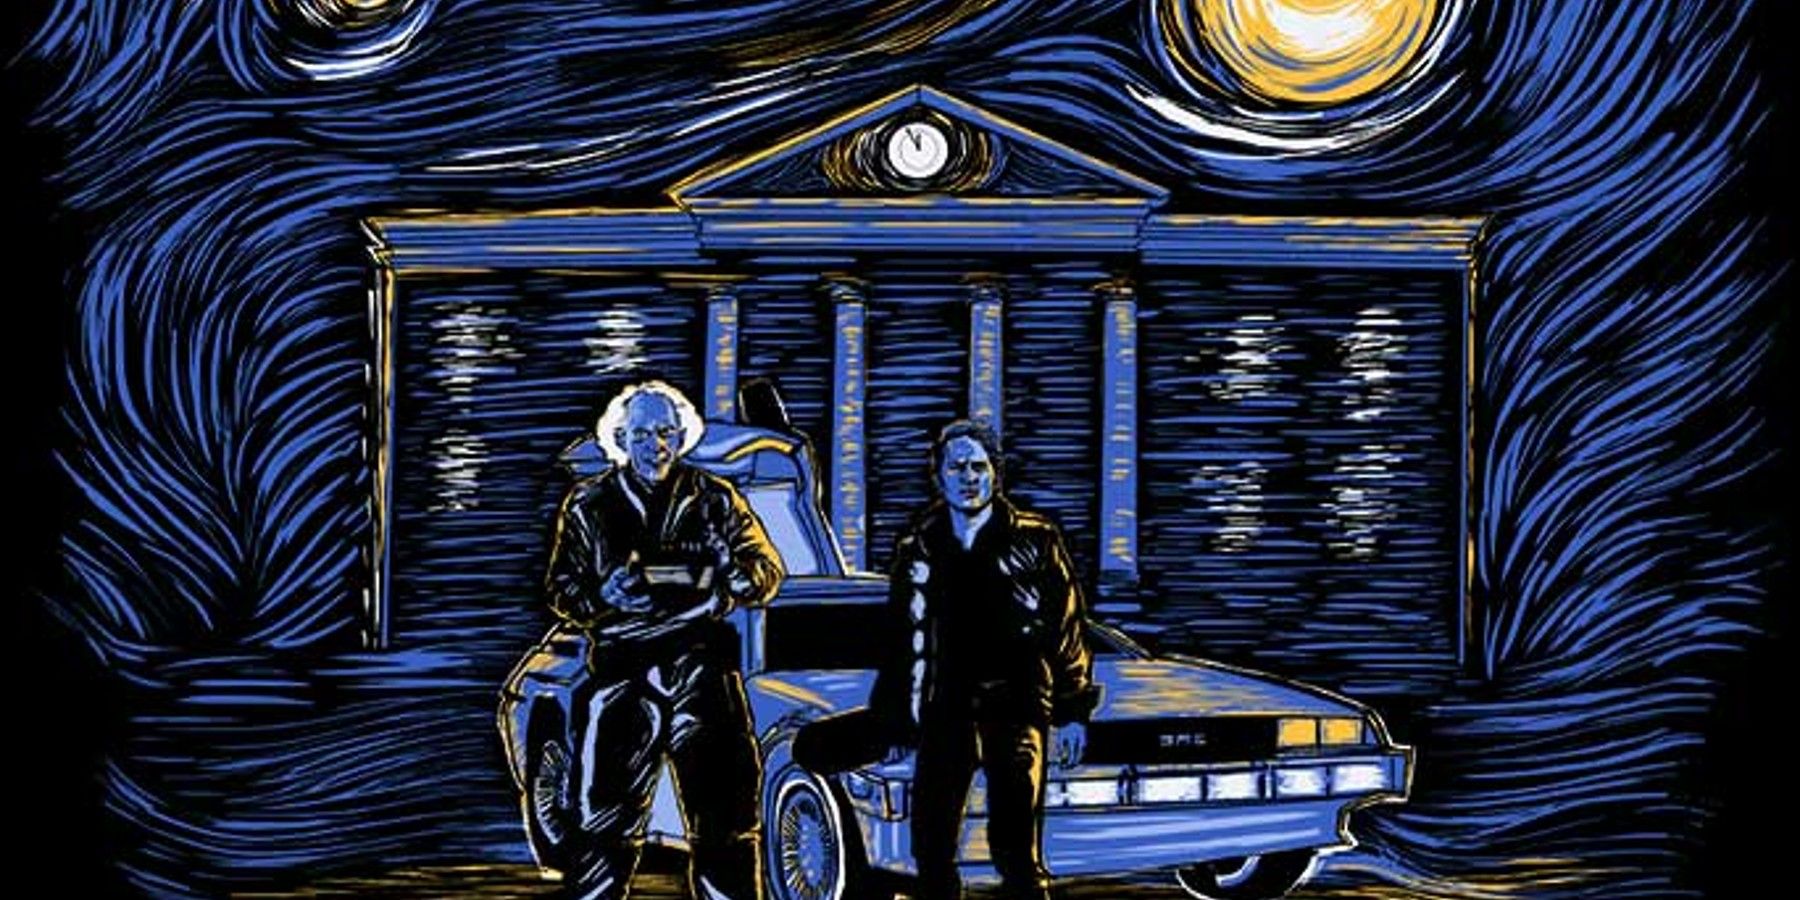 Back to the Future Becomes a Van Gogh Painting in Stunning Fan Art